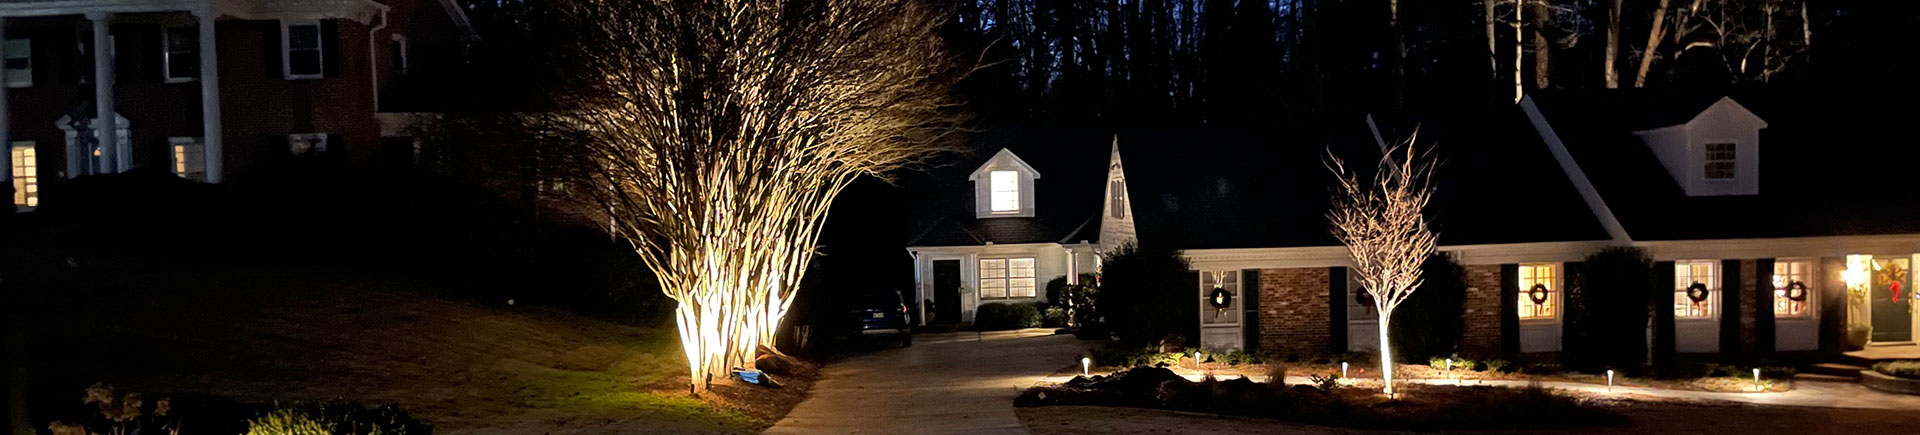 5 Reasons to Install Landscape Lighting This Spring Fayetteville, GA